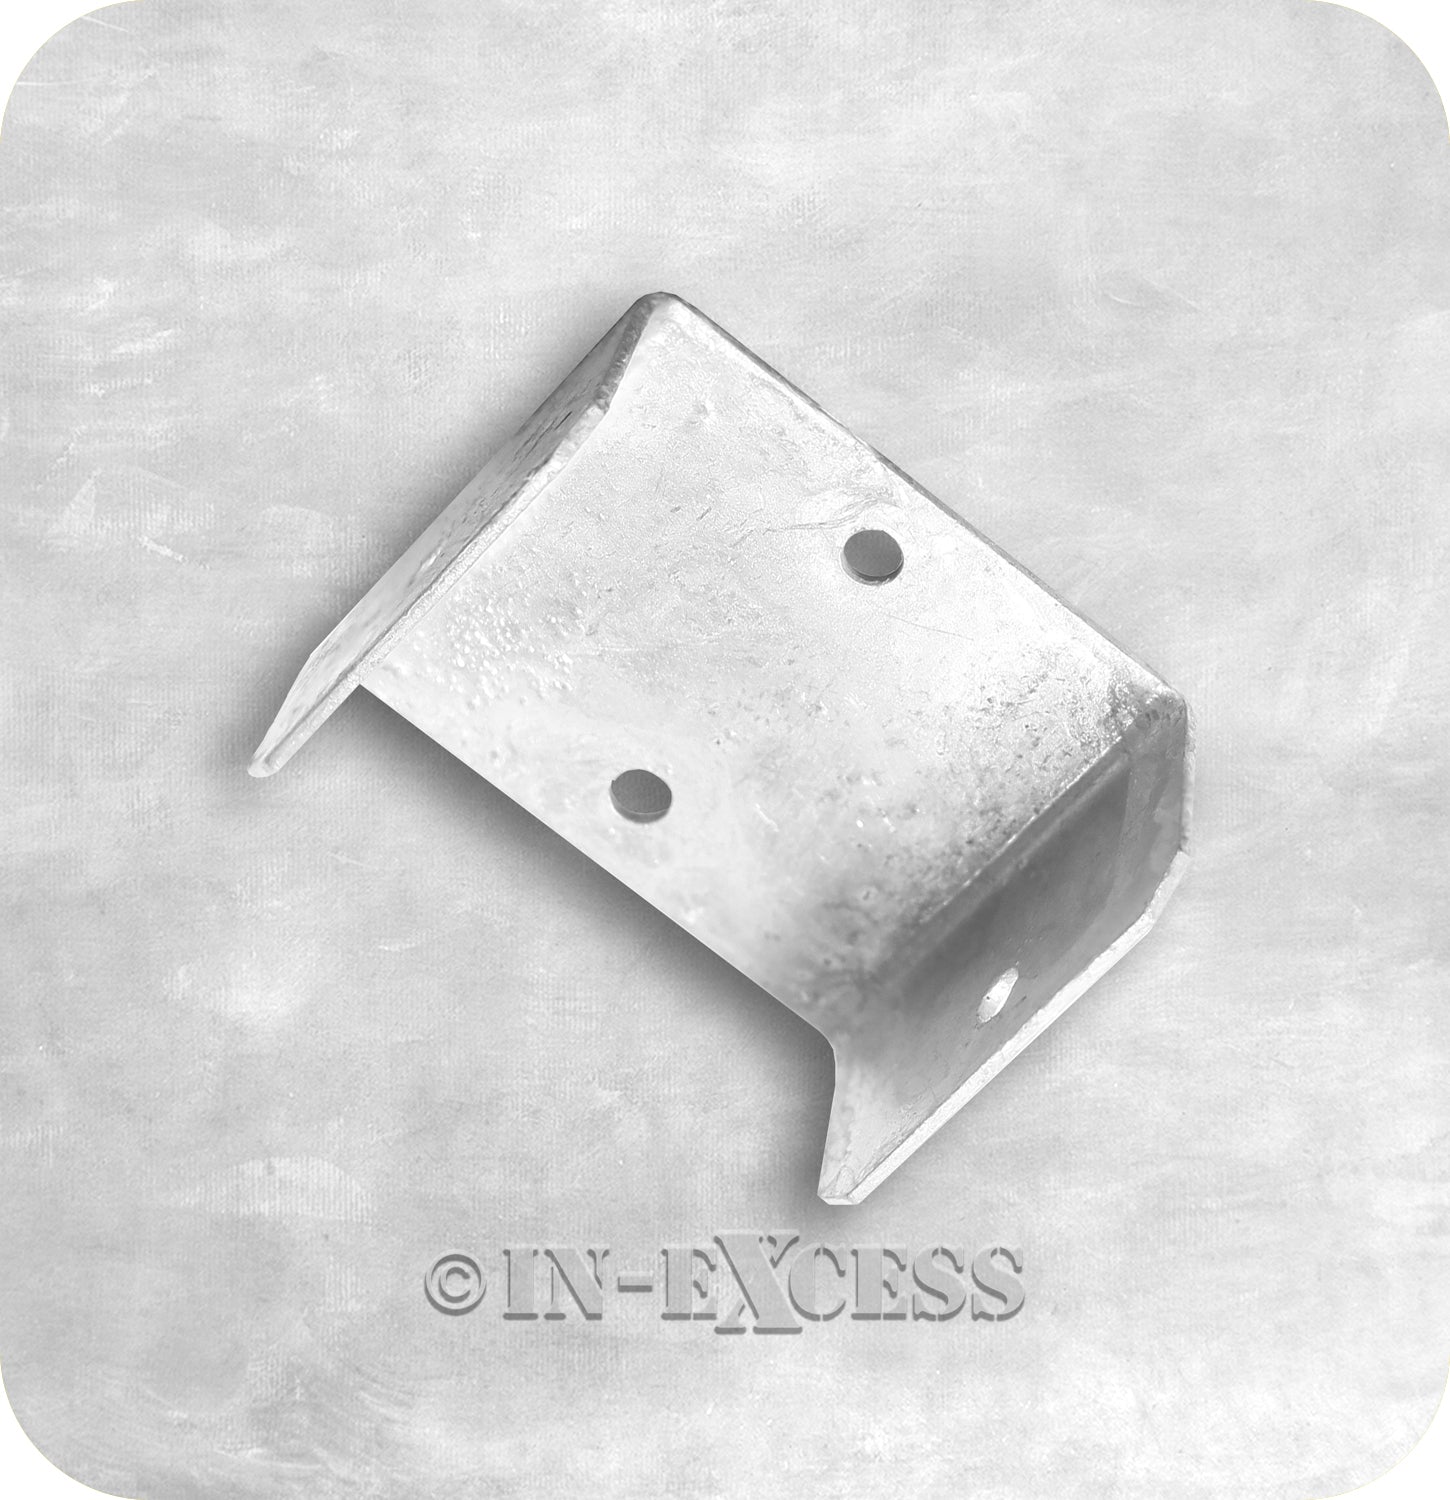 In-Excess Hardware Galvanised Fence Panel Fixing Fencing U-Clips - 55mm